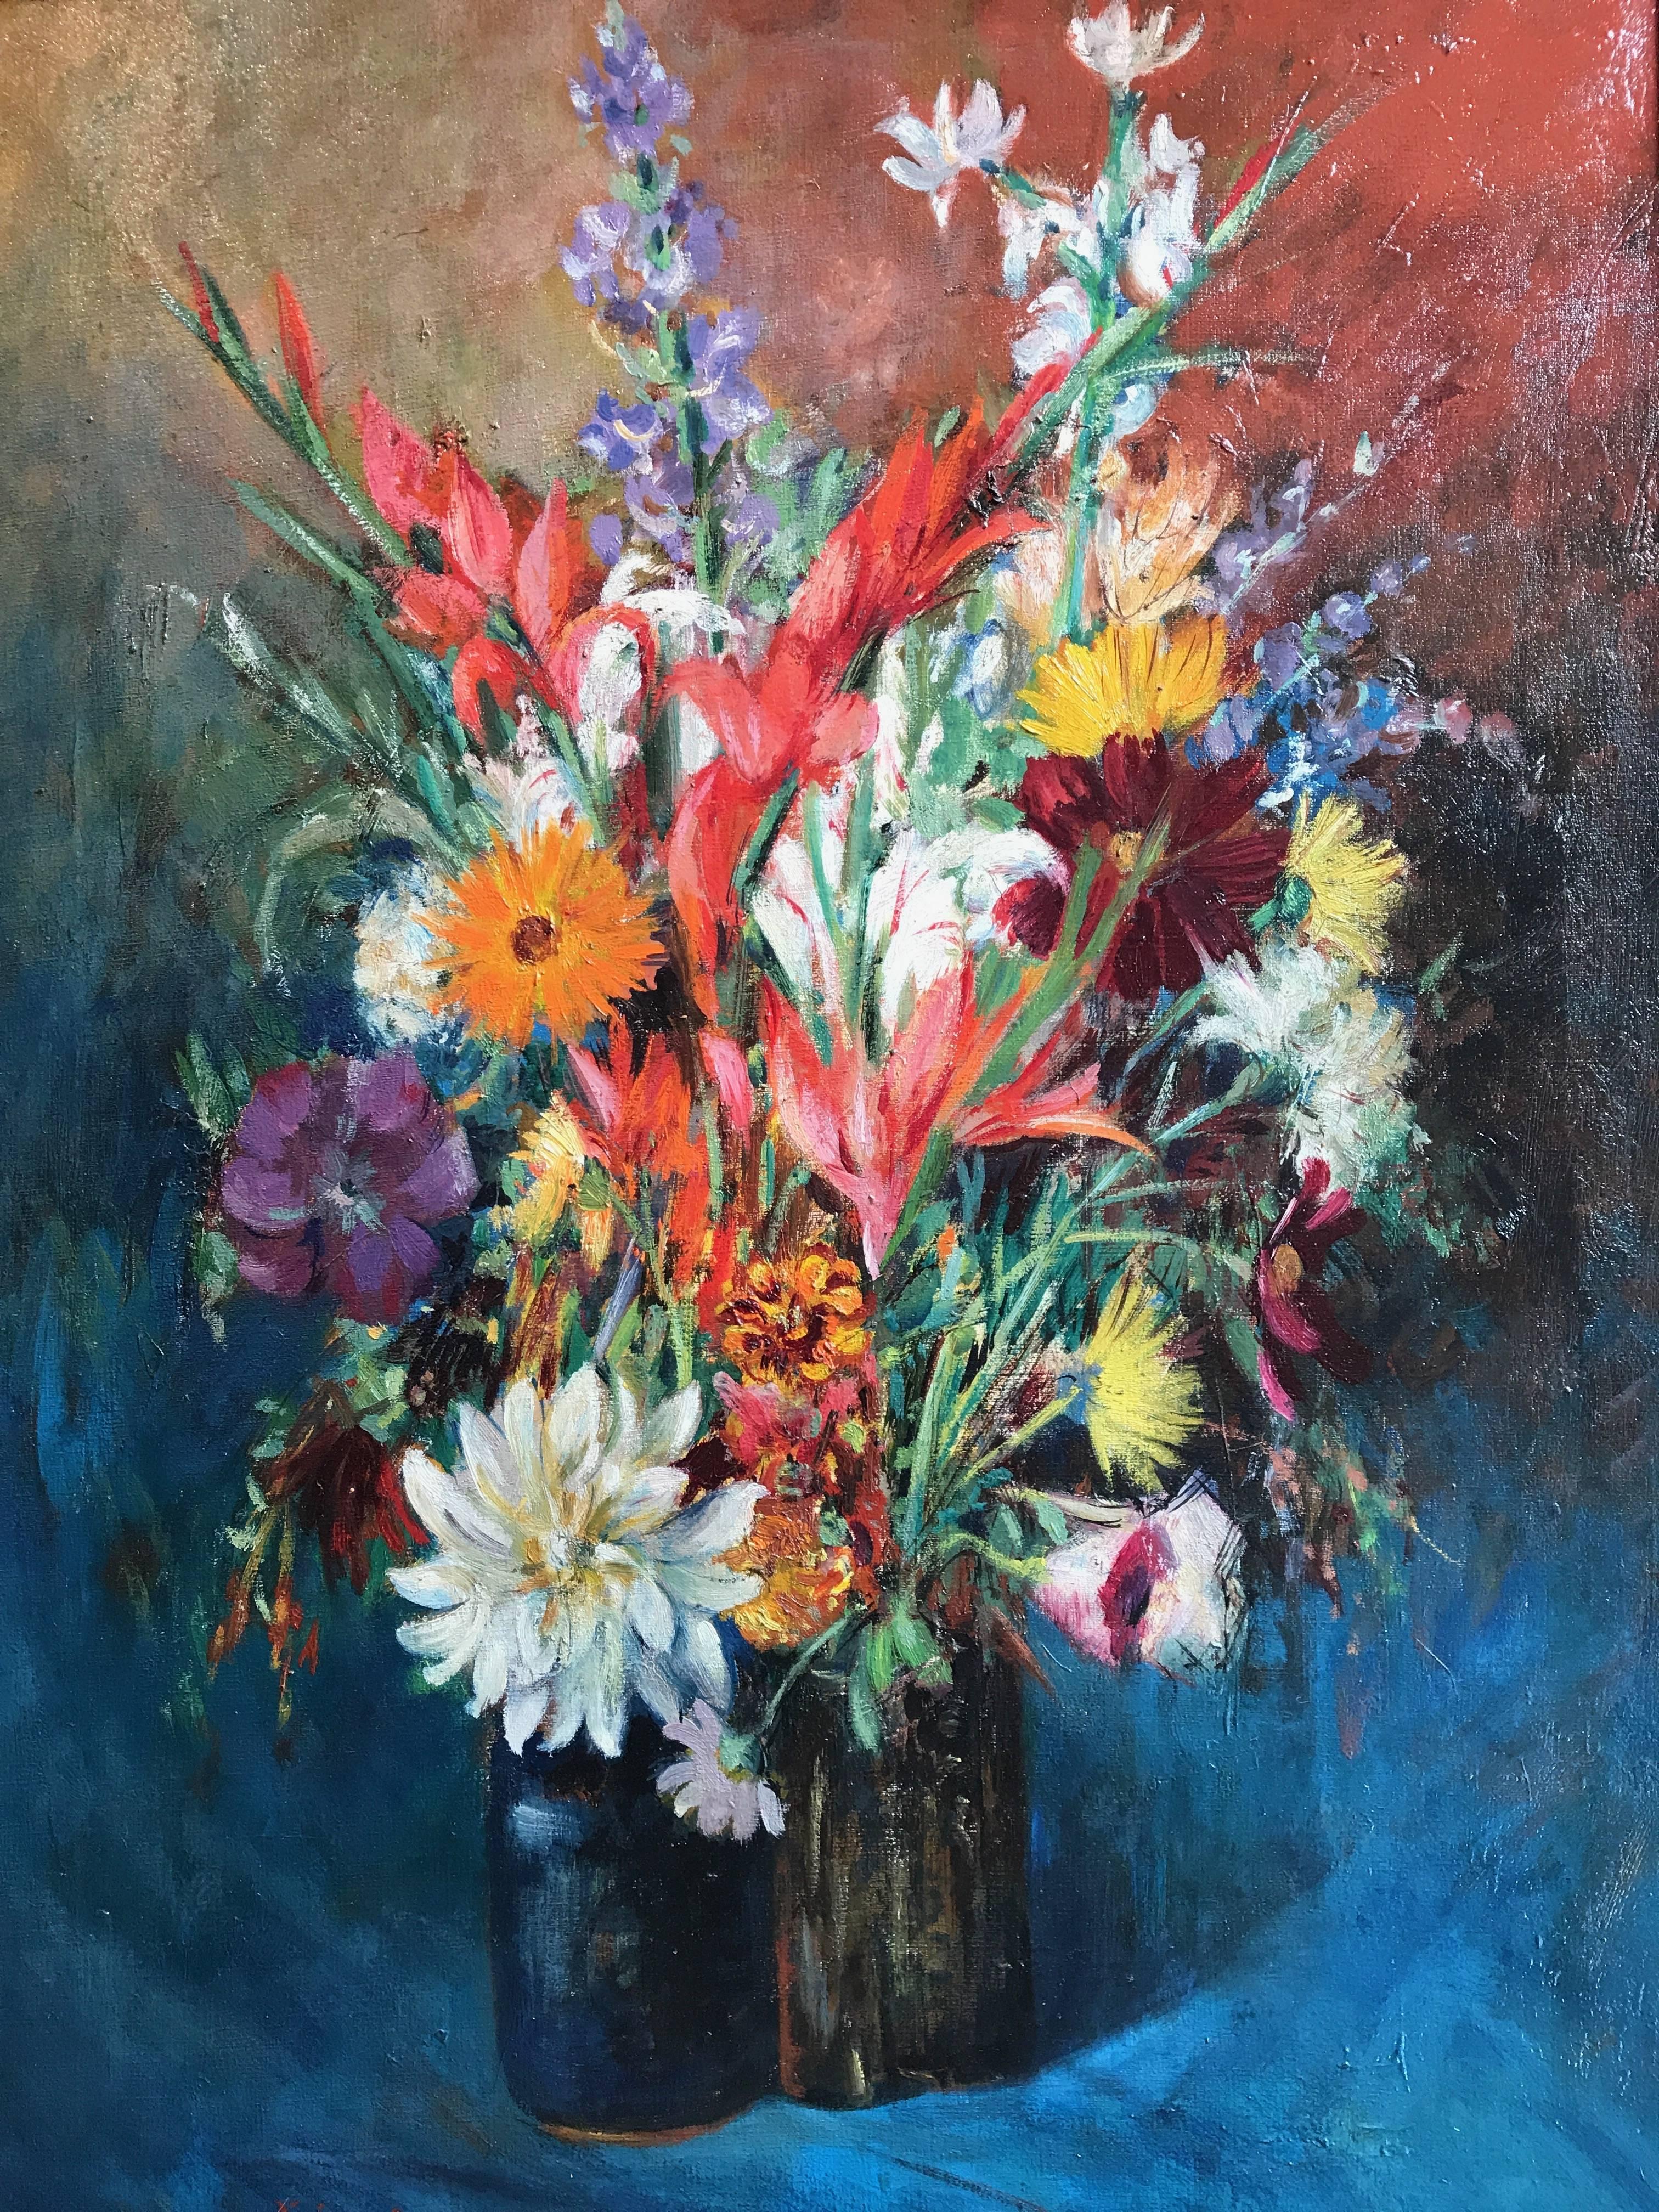 Montini Umberto, polychrome flowers composition, oil on canvas painting dating back to circa 1950s, signed lower left U.Montini by the Milanese artist Umberto Montini (Milano 1897- Busto Arsizio 1978).
The work comes from a private villa of Milan